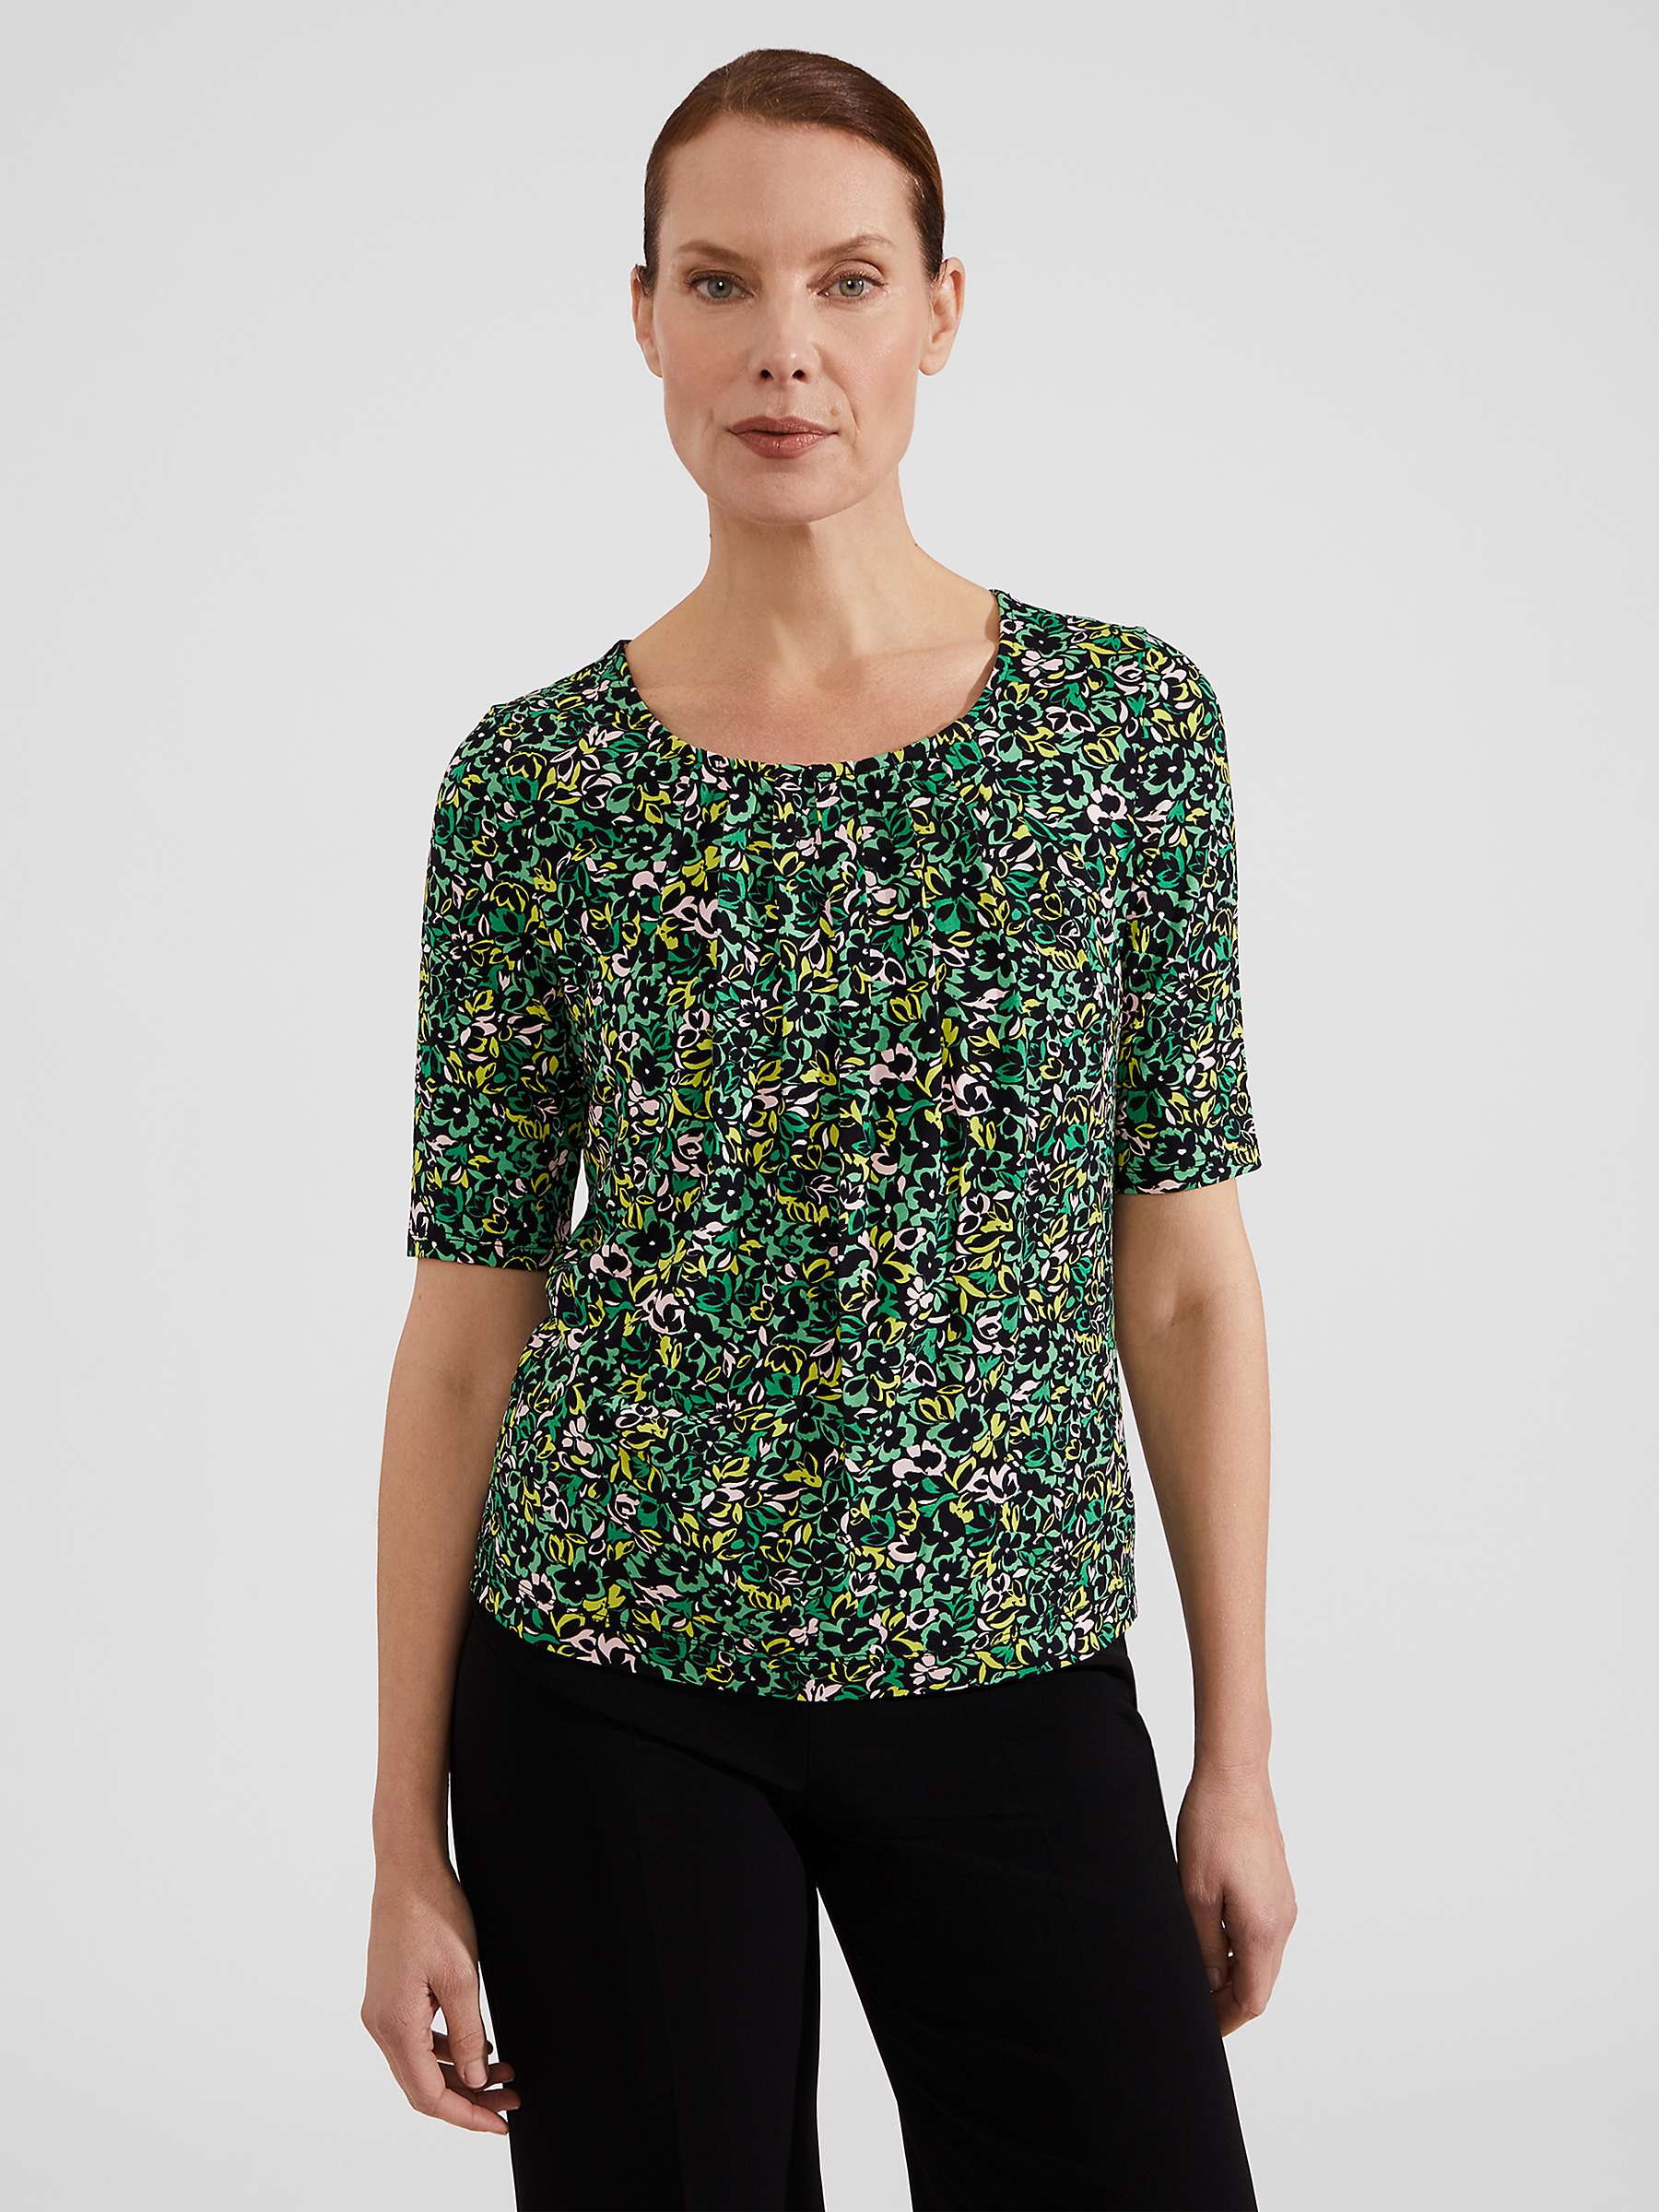 Buy Hobbs Jacqueline Abstract Print Top, Green/Multi Online at johnlewis.com